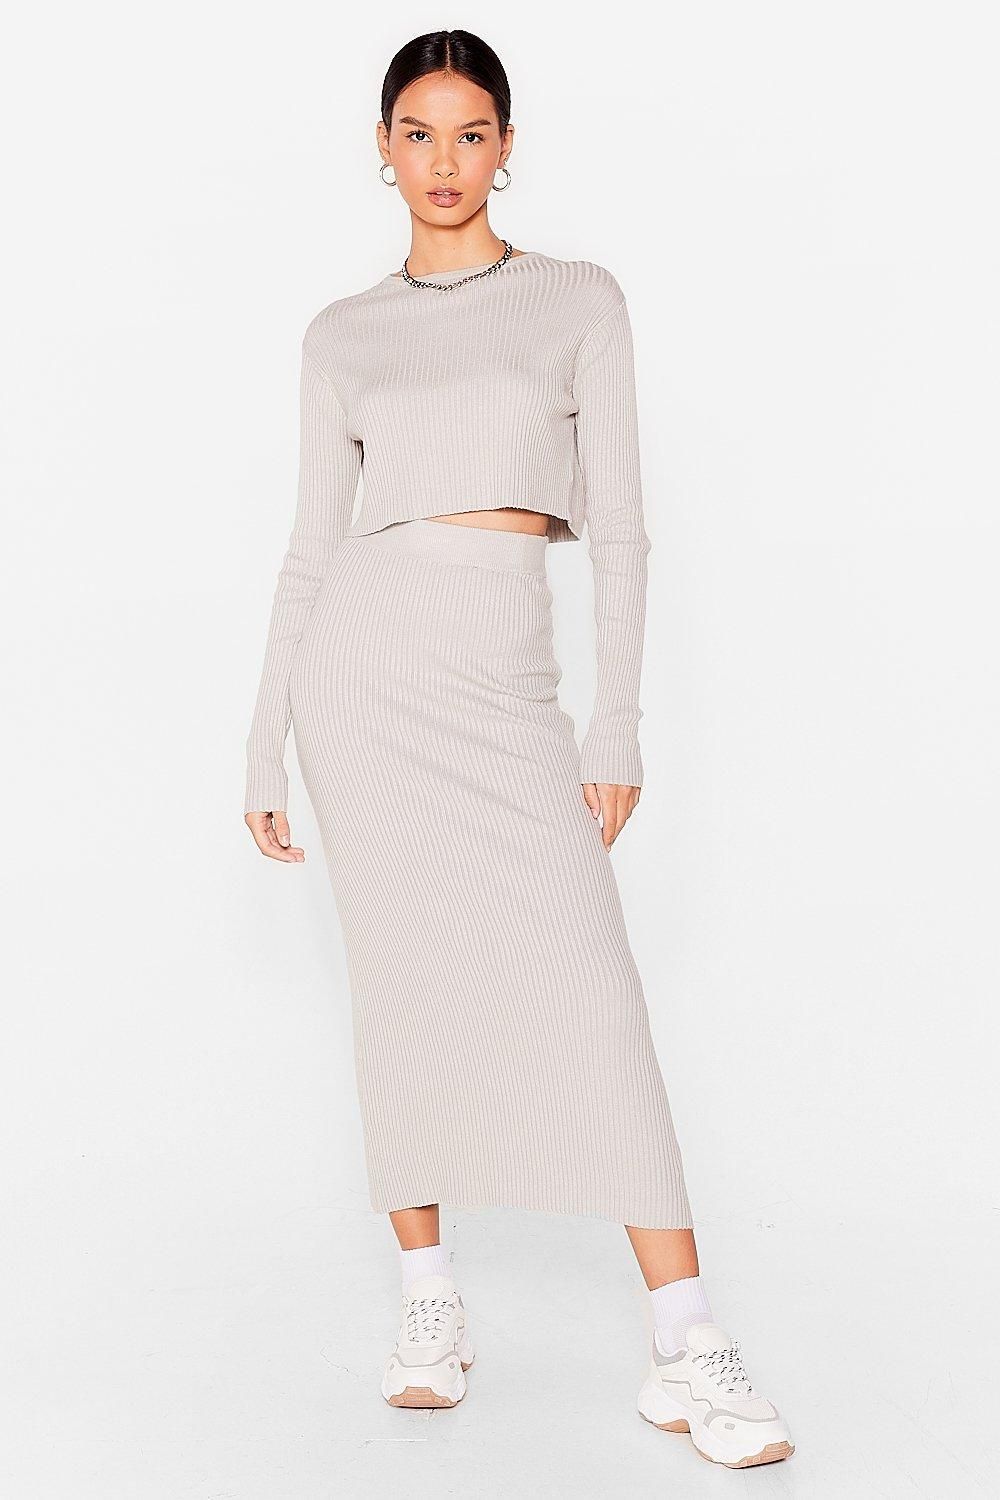 Womens Knit's a Perfect Match Crop Top and Skirt Set - Grey | NastyGal (US & CA)